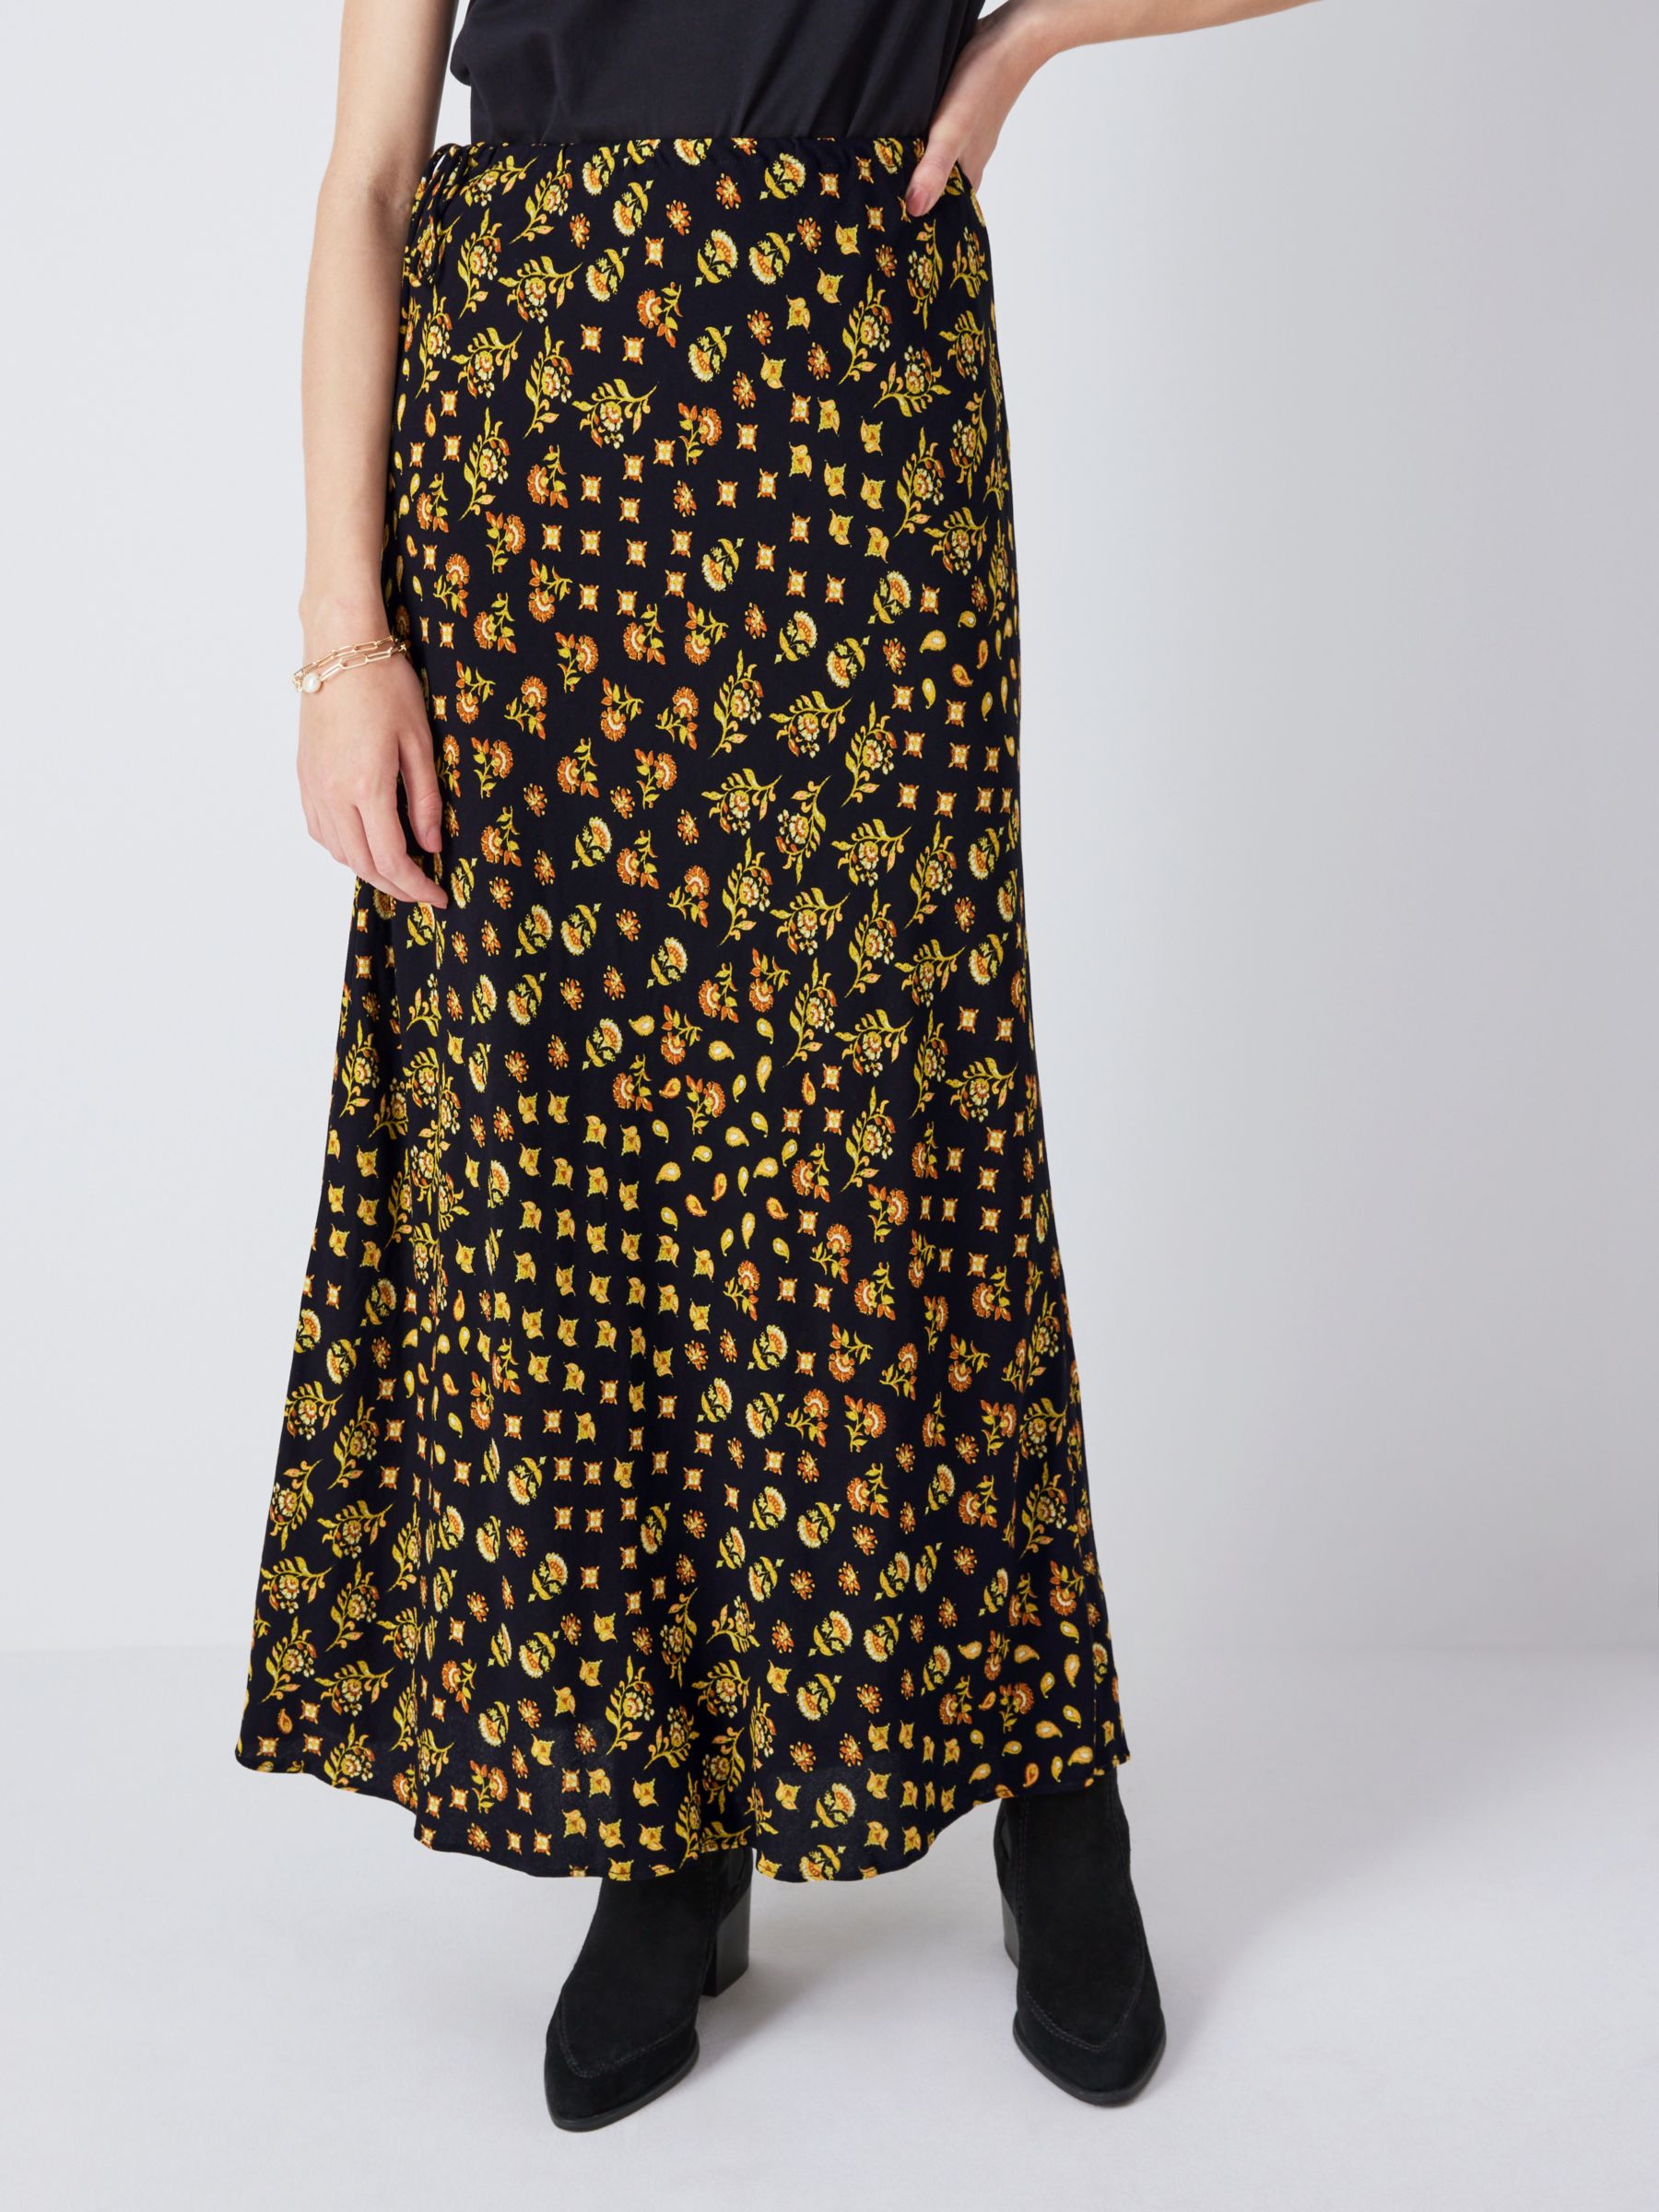 AND/OR Nyla Woodblock Floral Maxi Skirt, Black/Multi